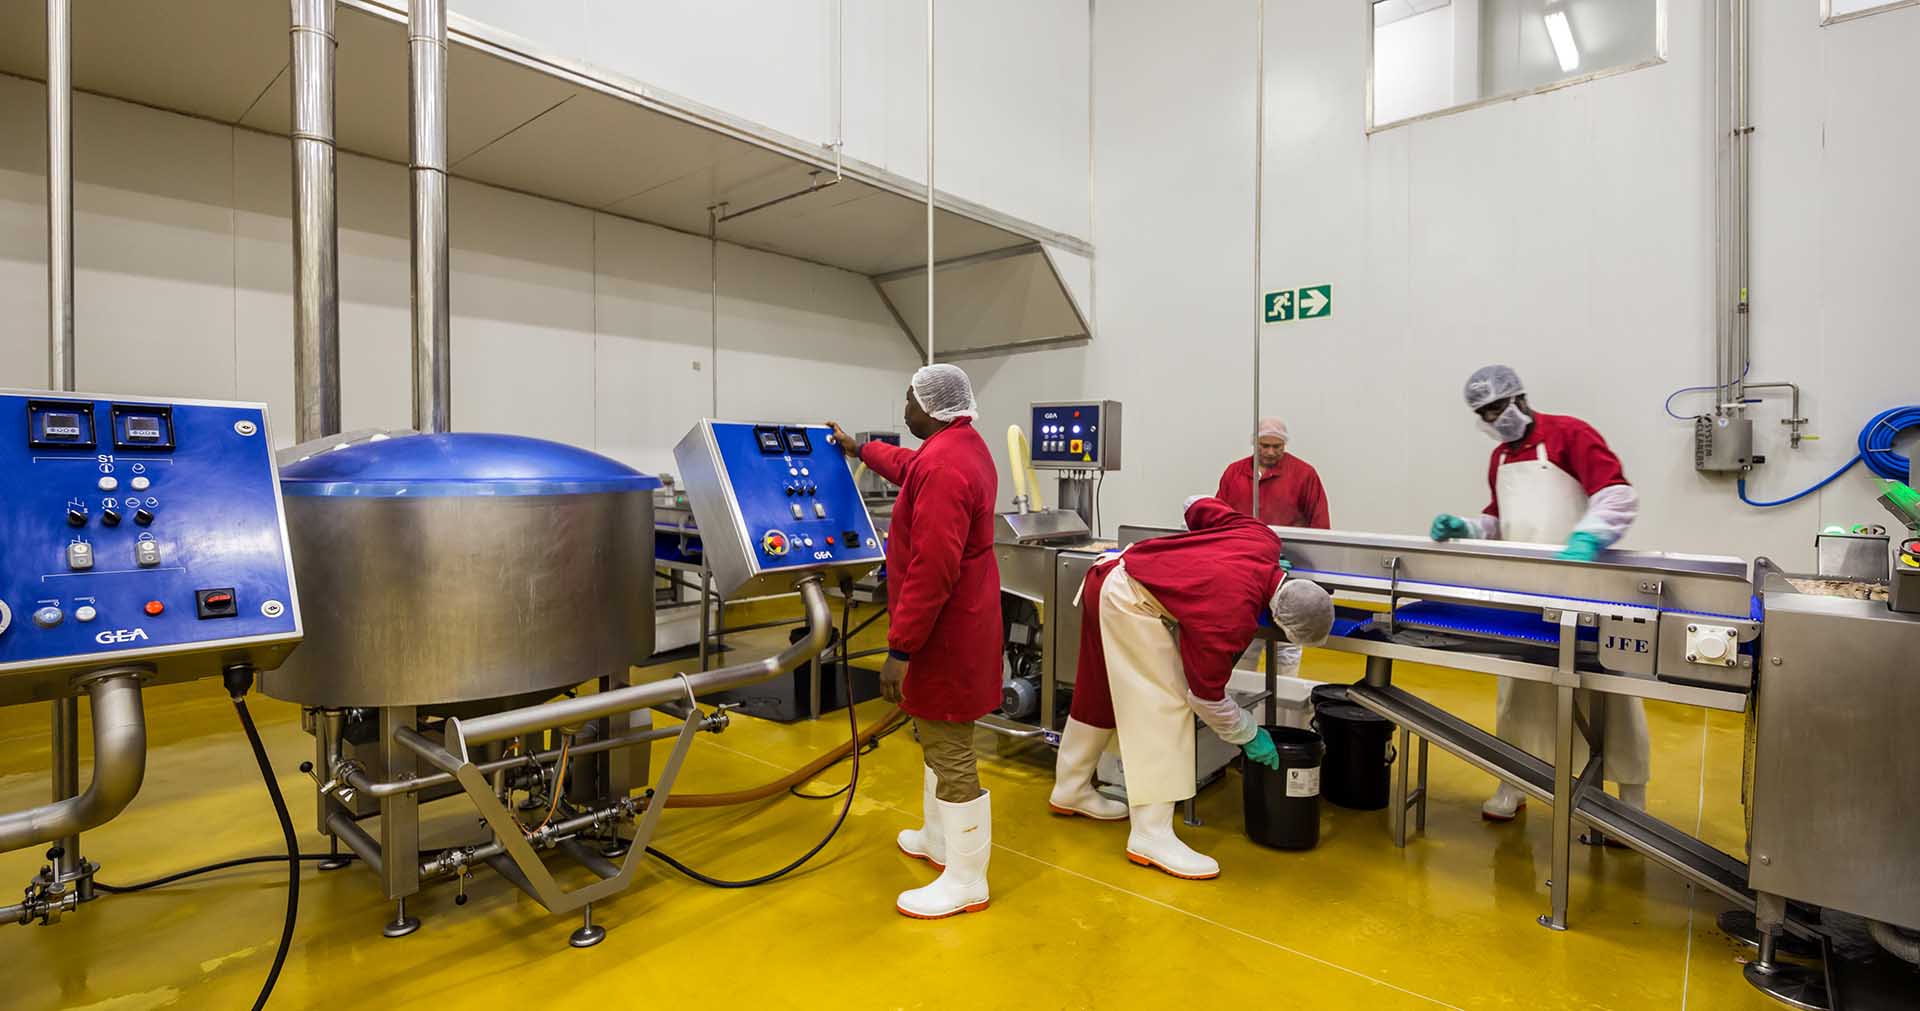 Industrial Photography, Braviz Fine Foods factory workers, South Africa